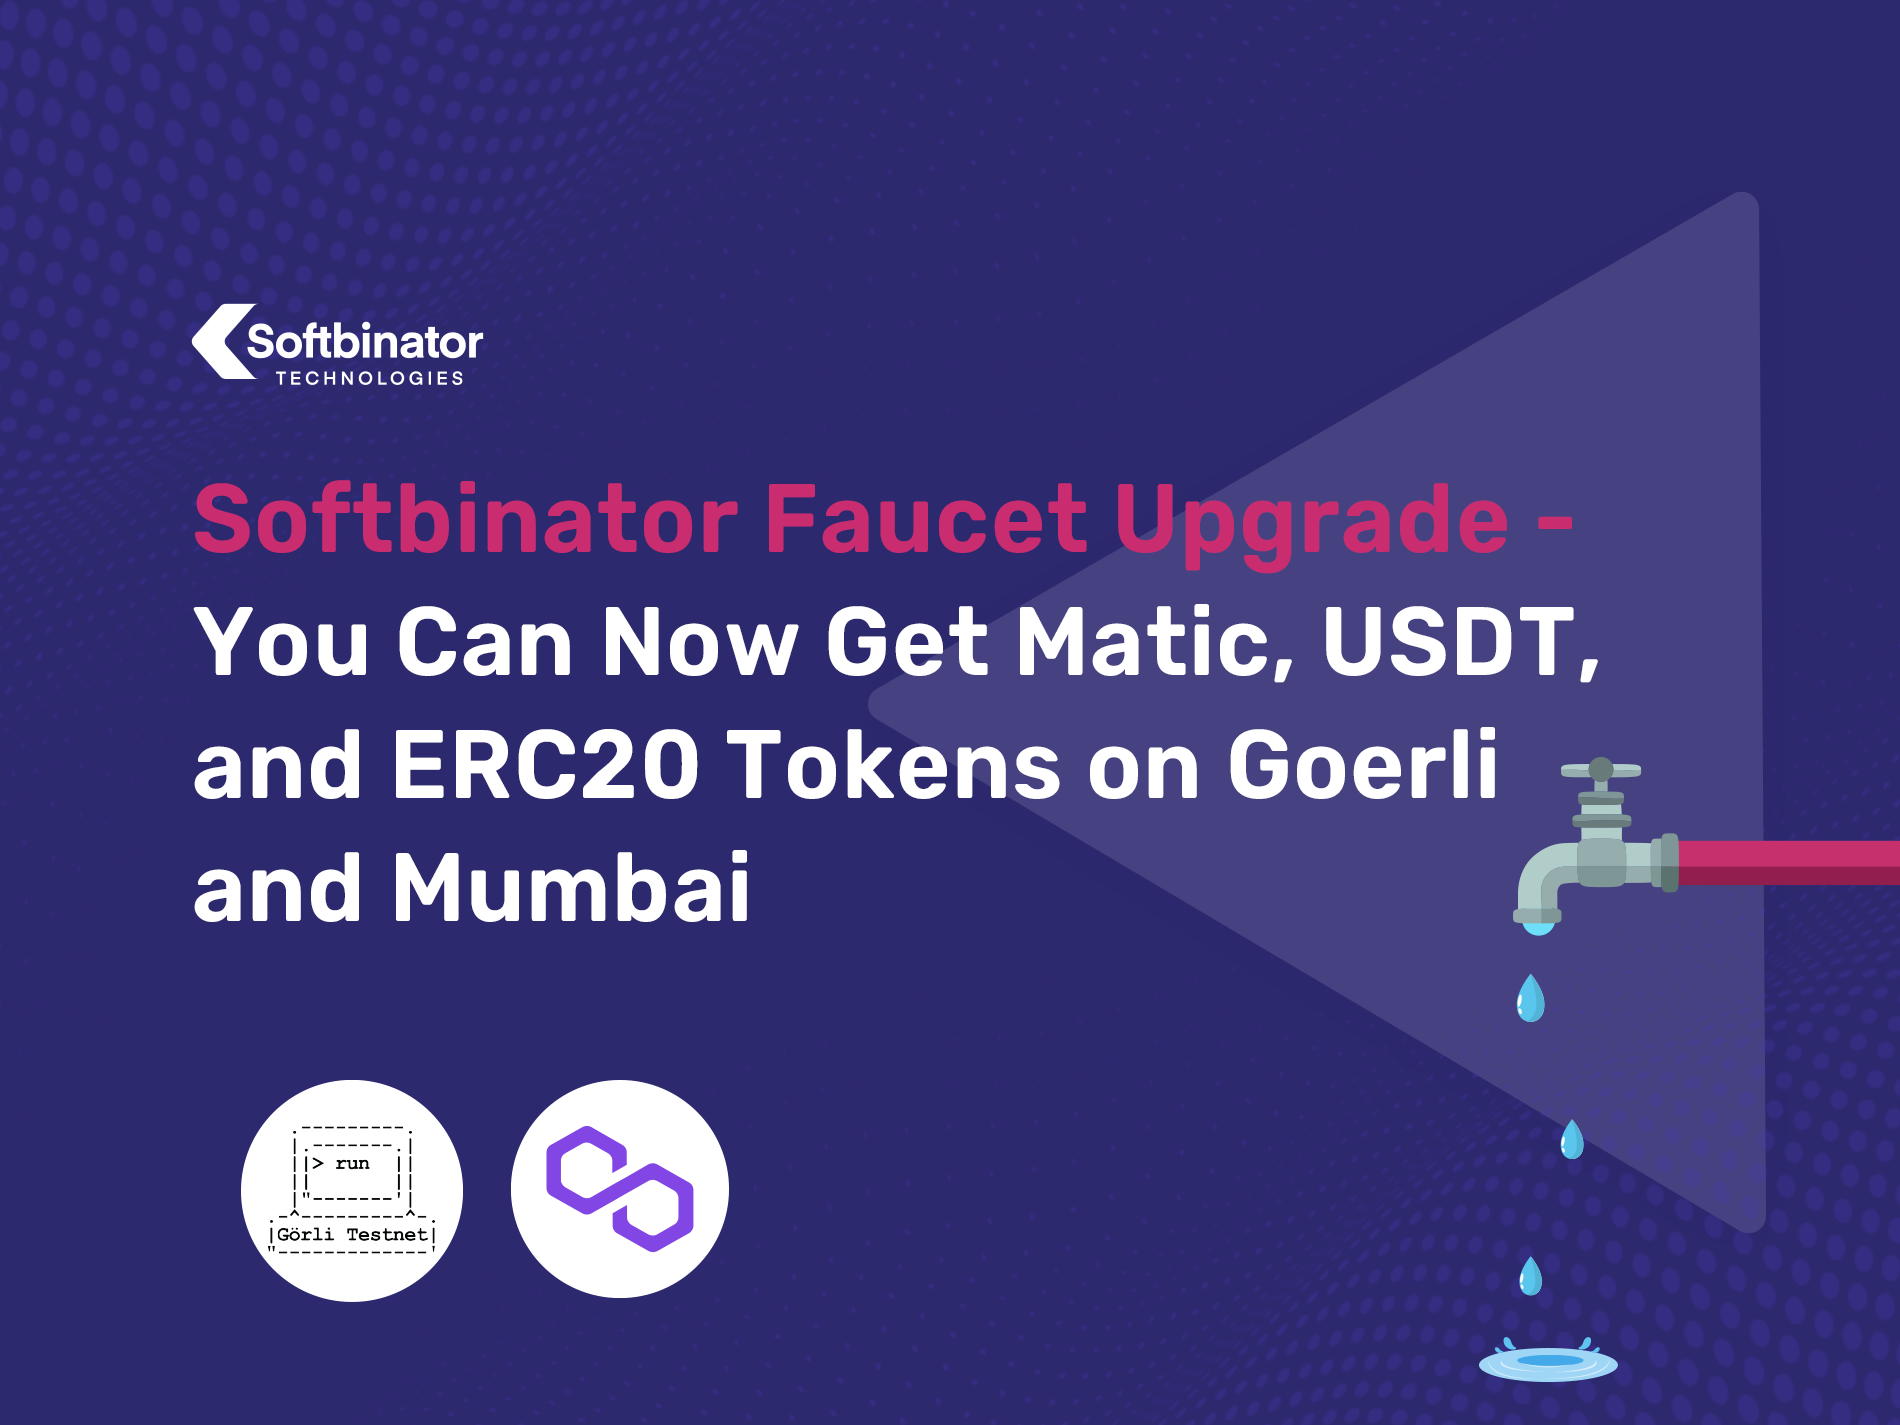 Softbinator Faucet Upgrade - You Can Now Get Matic, USDT, and ERC20 Tokens on Goerli and Mumbai